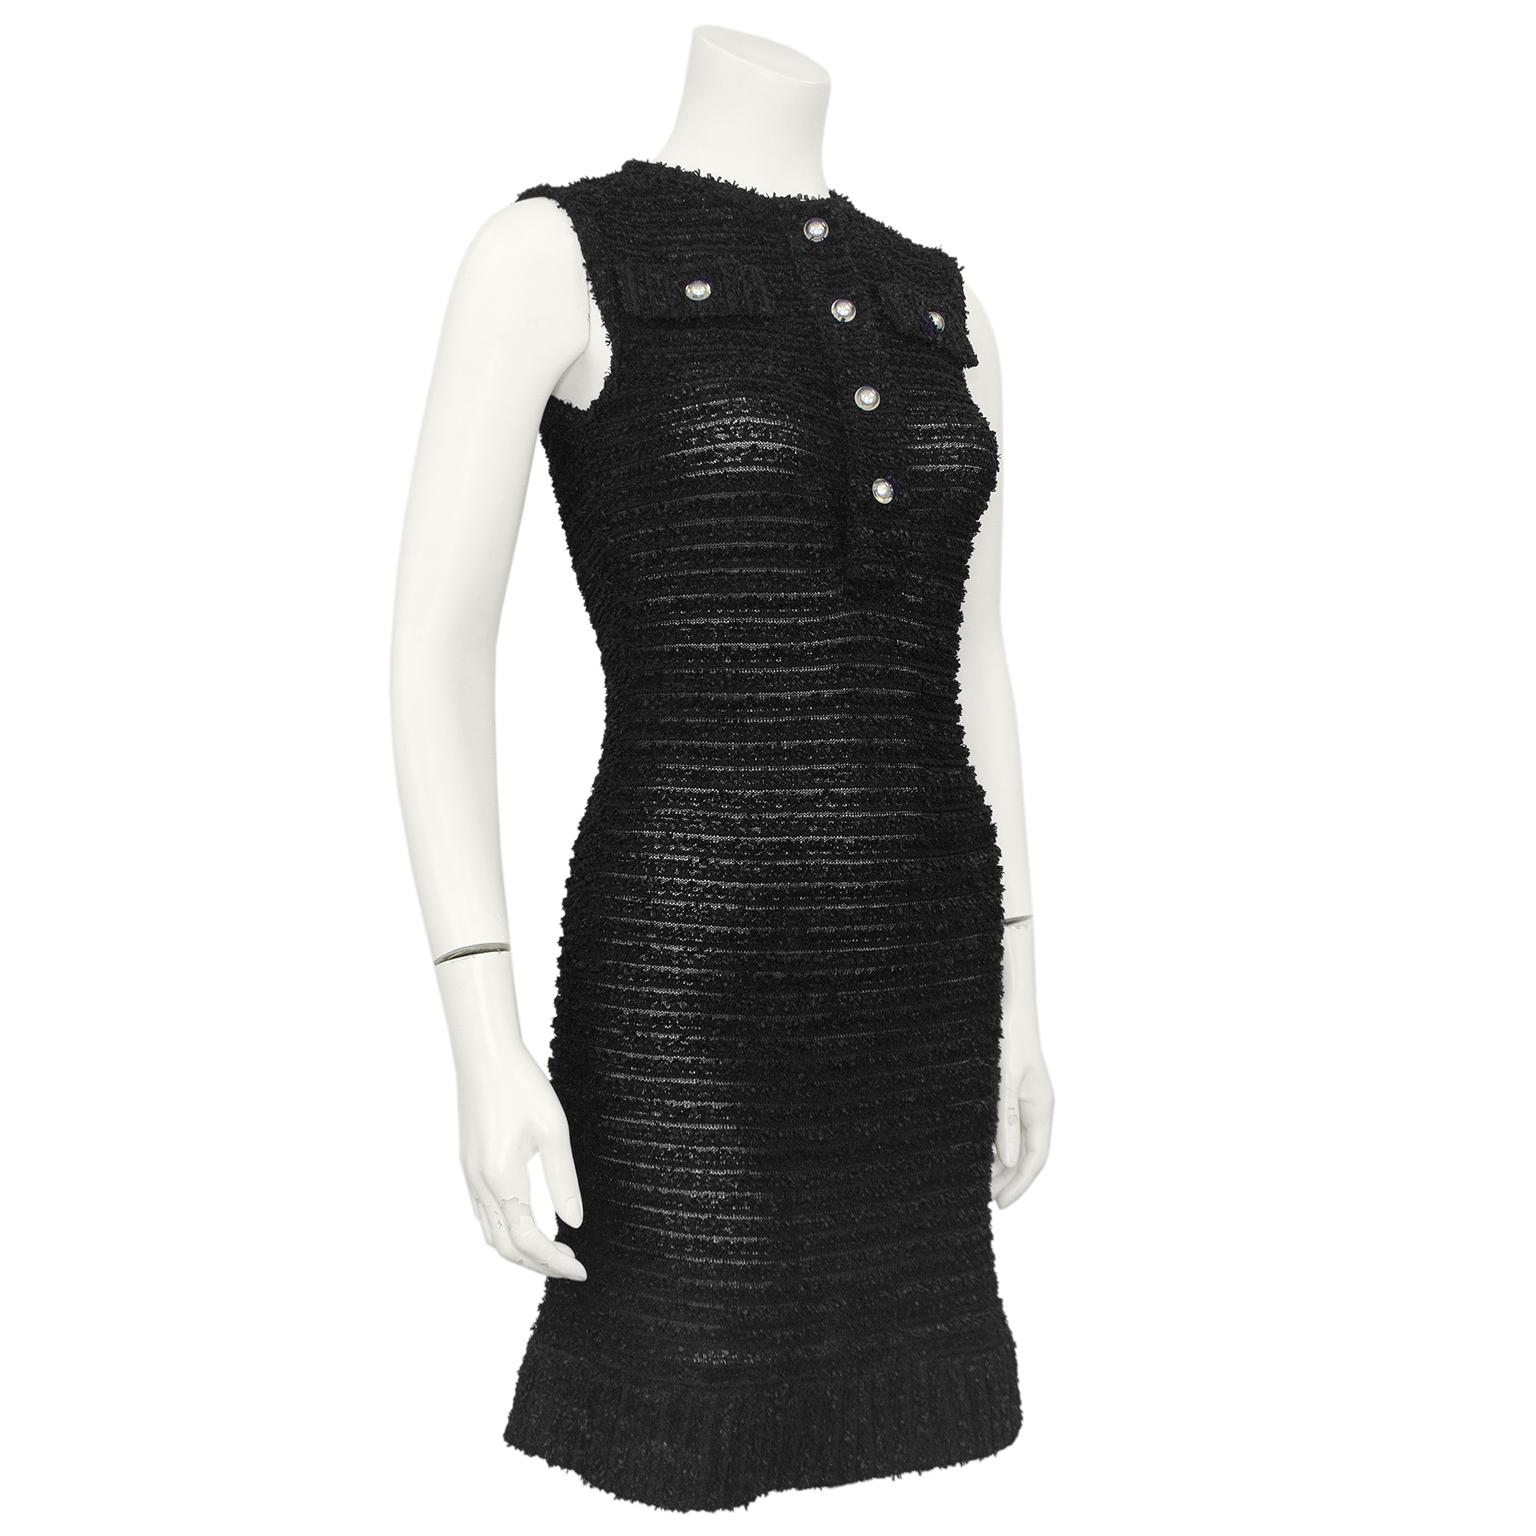 A fun twist on a classic Chanel dress! Mid 20000s Chanel black boucle open knit sheer dress. Sleeveless with a henley neckline and faux flap pockets. The black is contrasted by the pearl logo buttons encased in lucite. Can be worn with a slip under